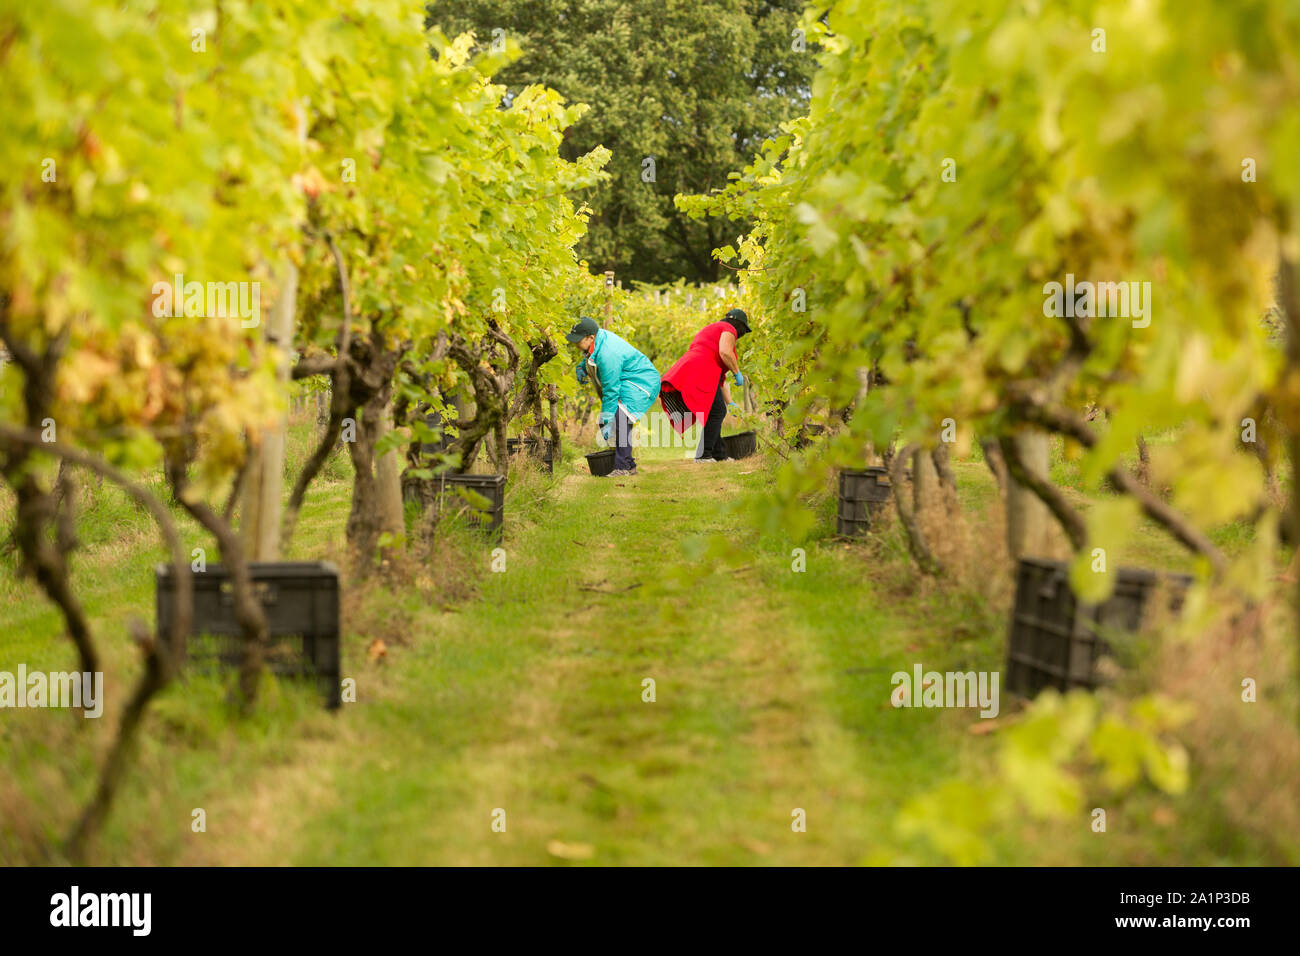 Astley, Worcestershire, UK. 28th September 2019. Volunteers begin the annual grape harvest at Astley Vineyard near Stourport-on-Severn, Worcestershire. One of Britain's oldest and most northerly vineyards, the family-run Astley Vineyard was established in 1971 and is a single estate. Its estate bottling plant is expected to produce around 10,000 bottles. The volunteers are currently picking the Madeleine Angevine - an almost UK exclusive grape variety. Peter Lopeman/Alamy Live News Stock Photo